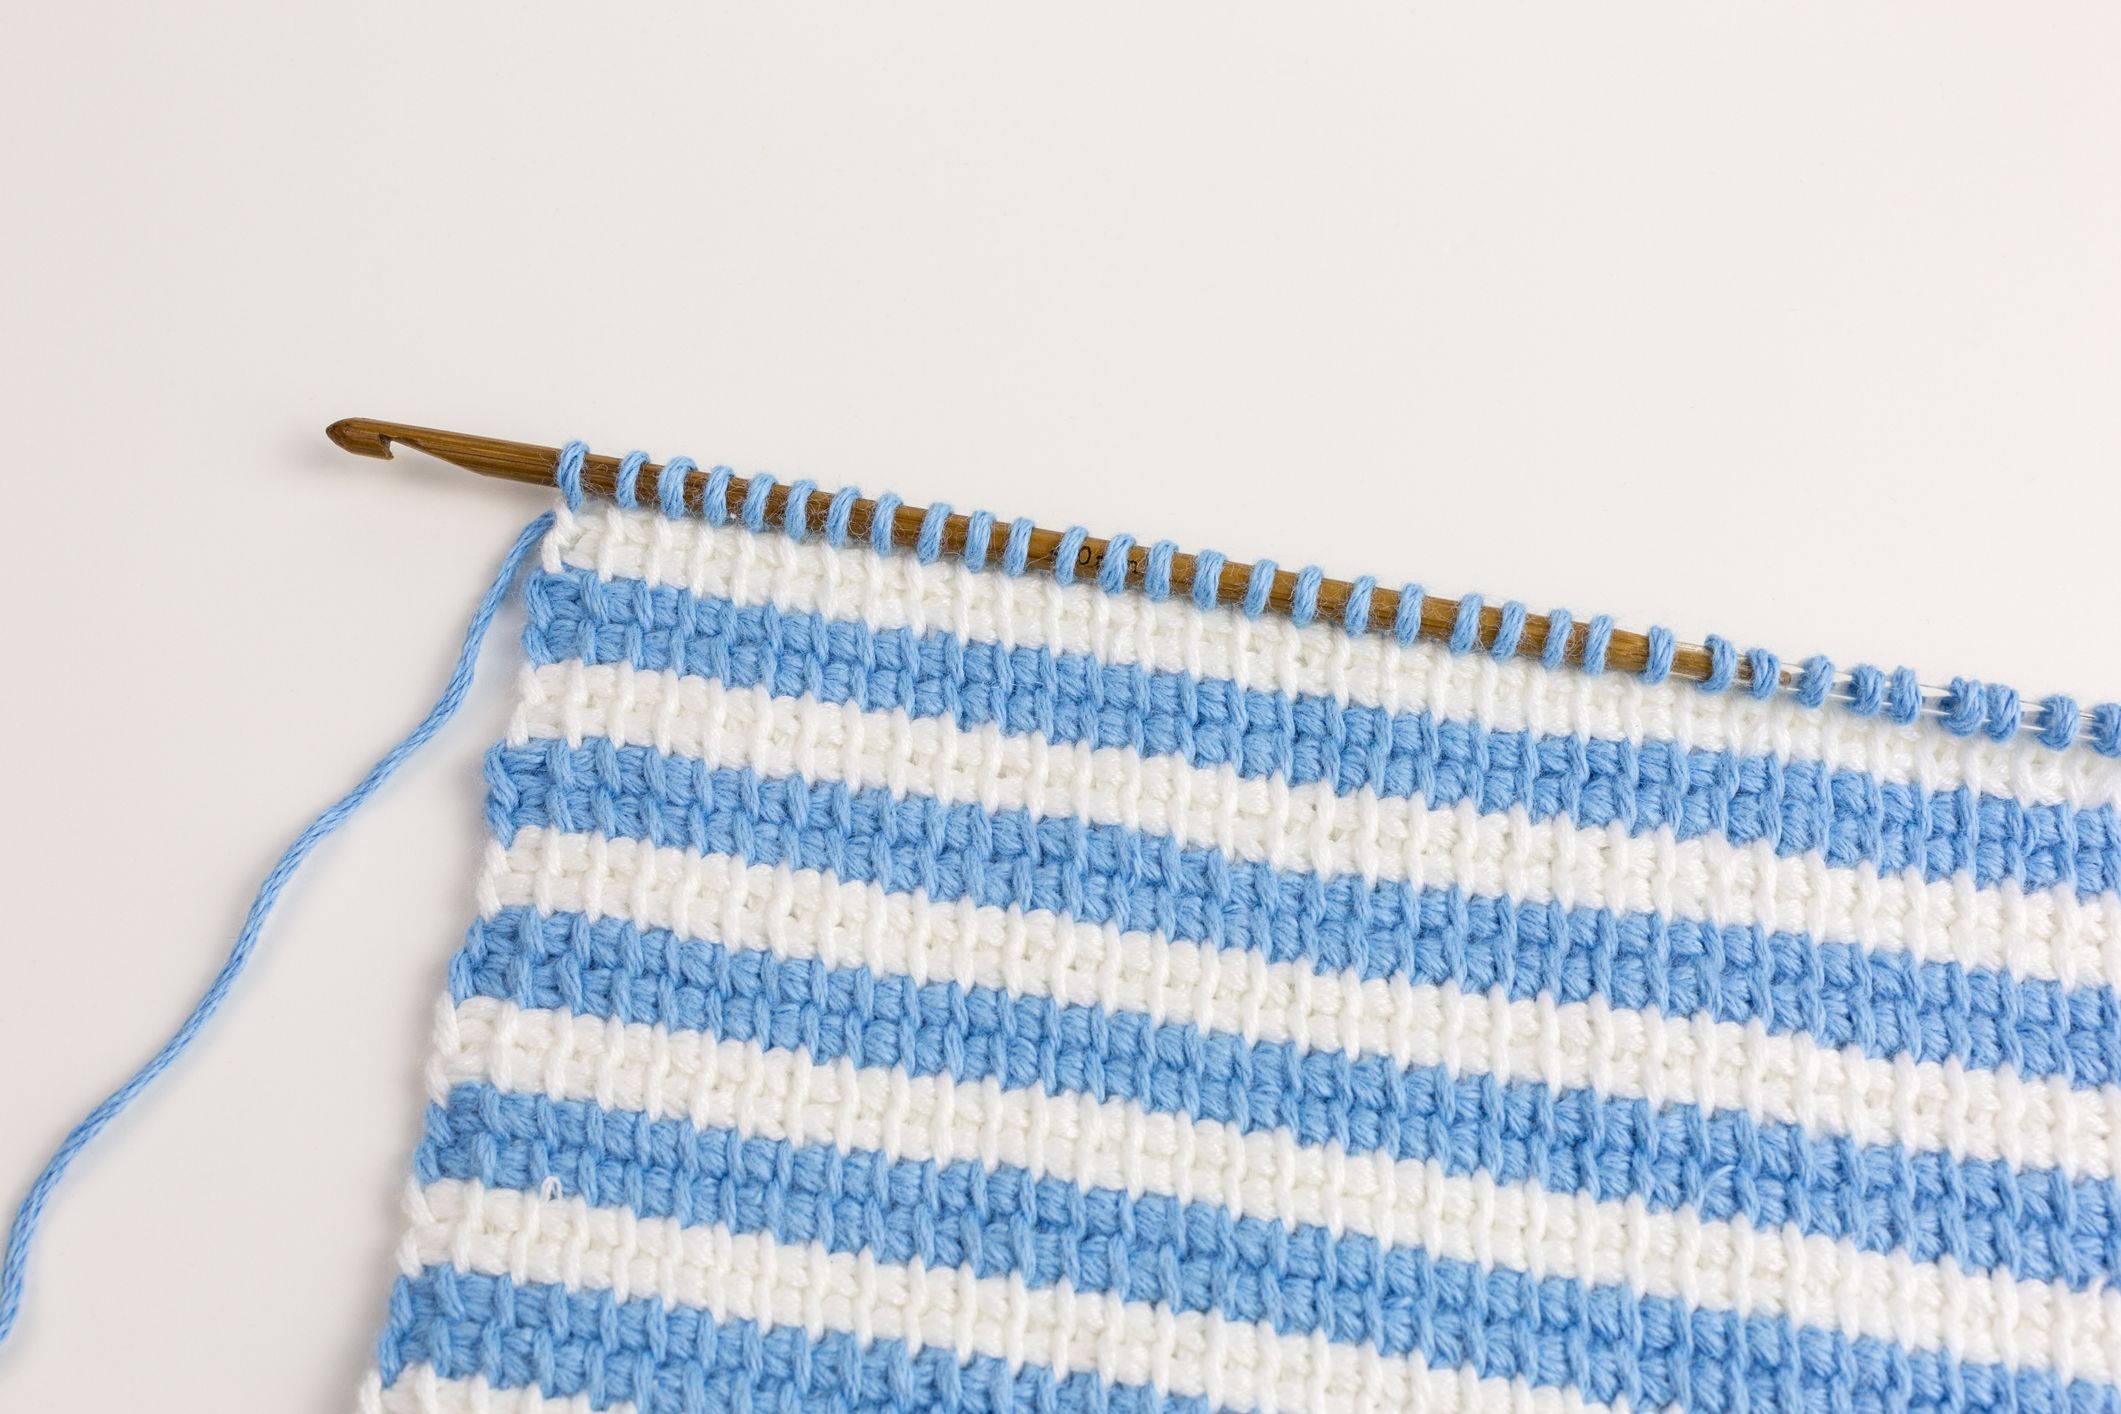 5 Simple Stitches for Tunisian Crochet Beginners + Tips!